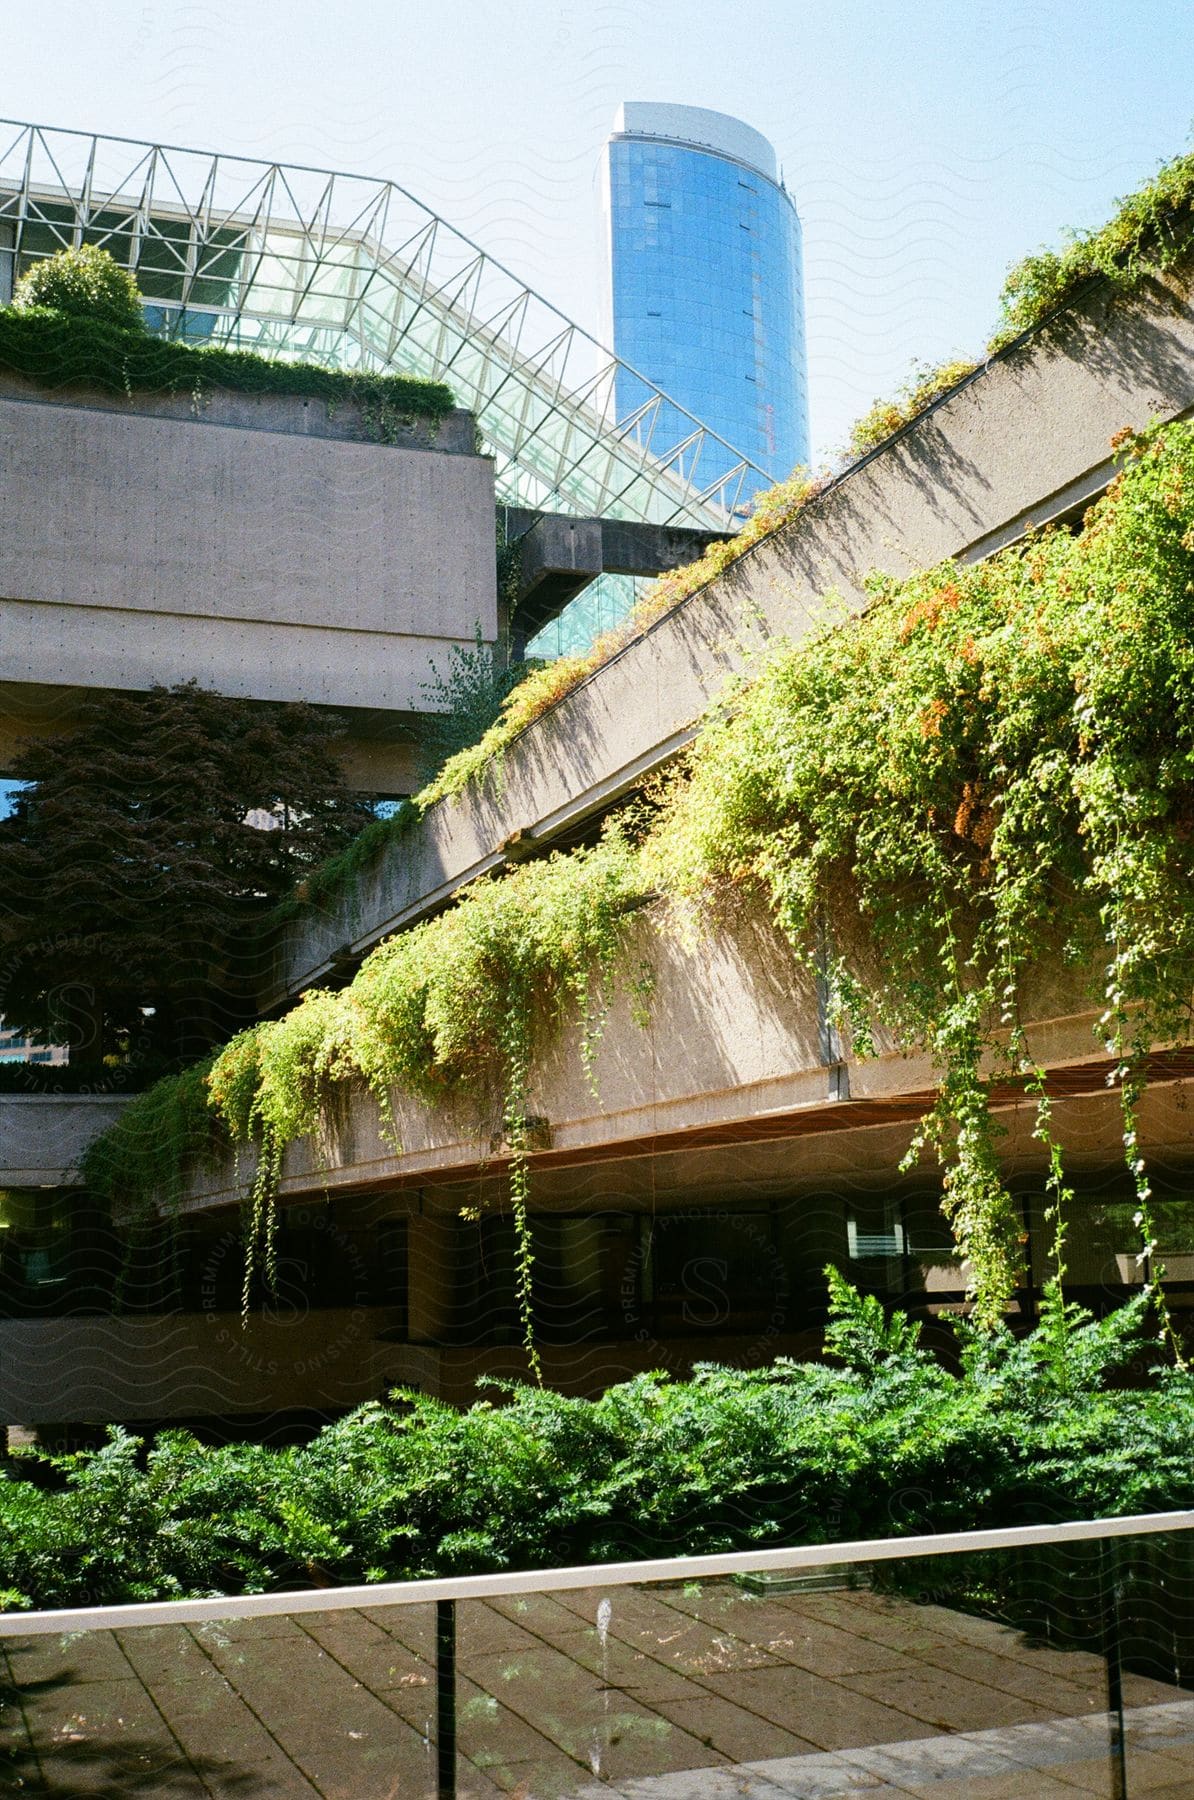 External architecture of a building with green plants and a skyscraper in the background